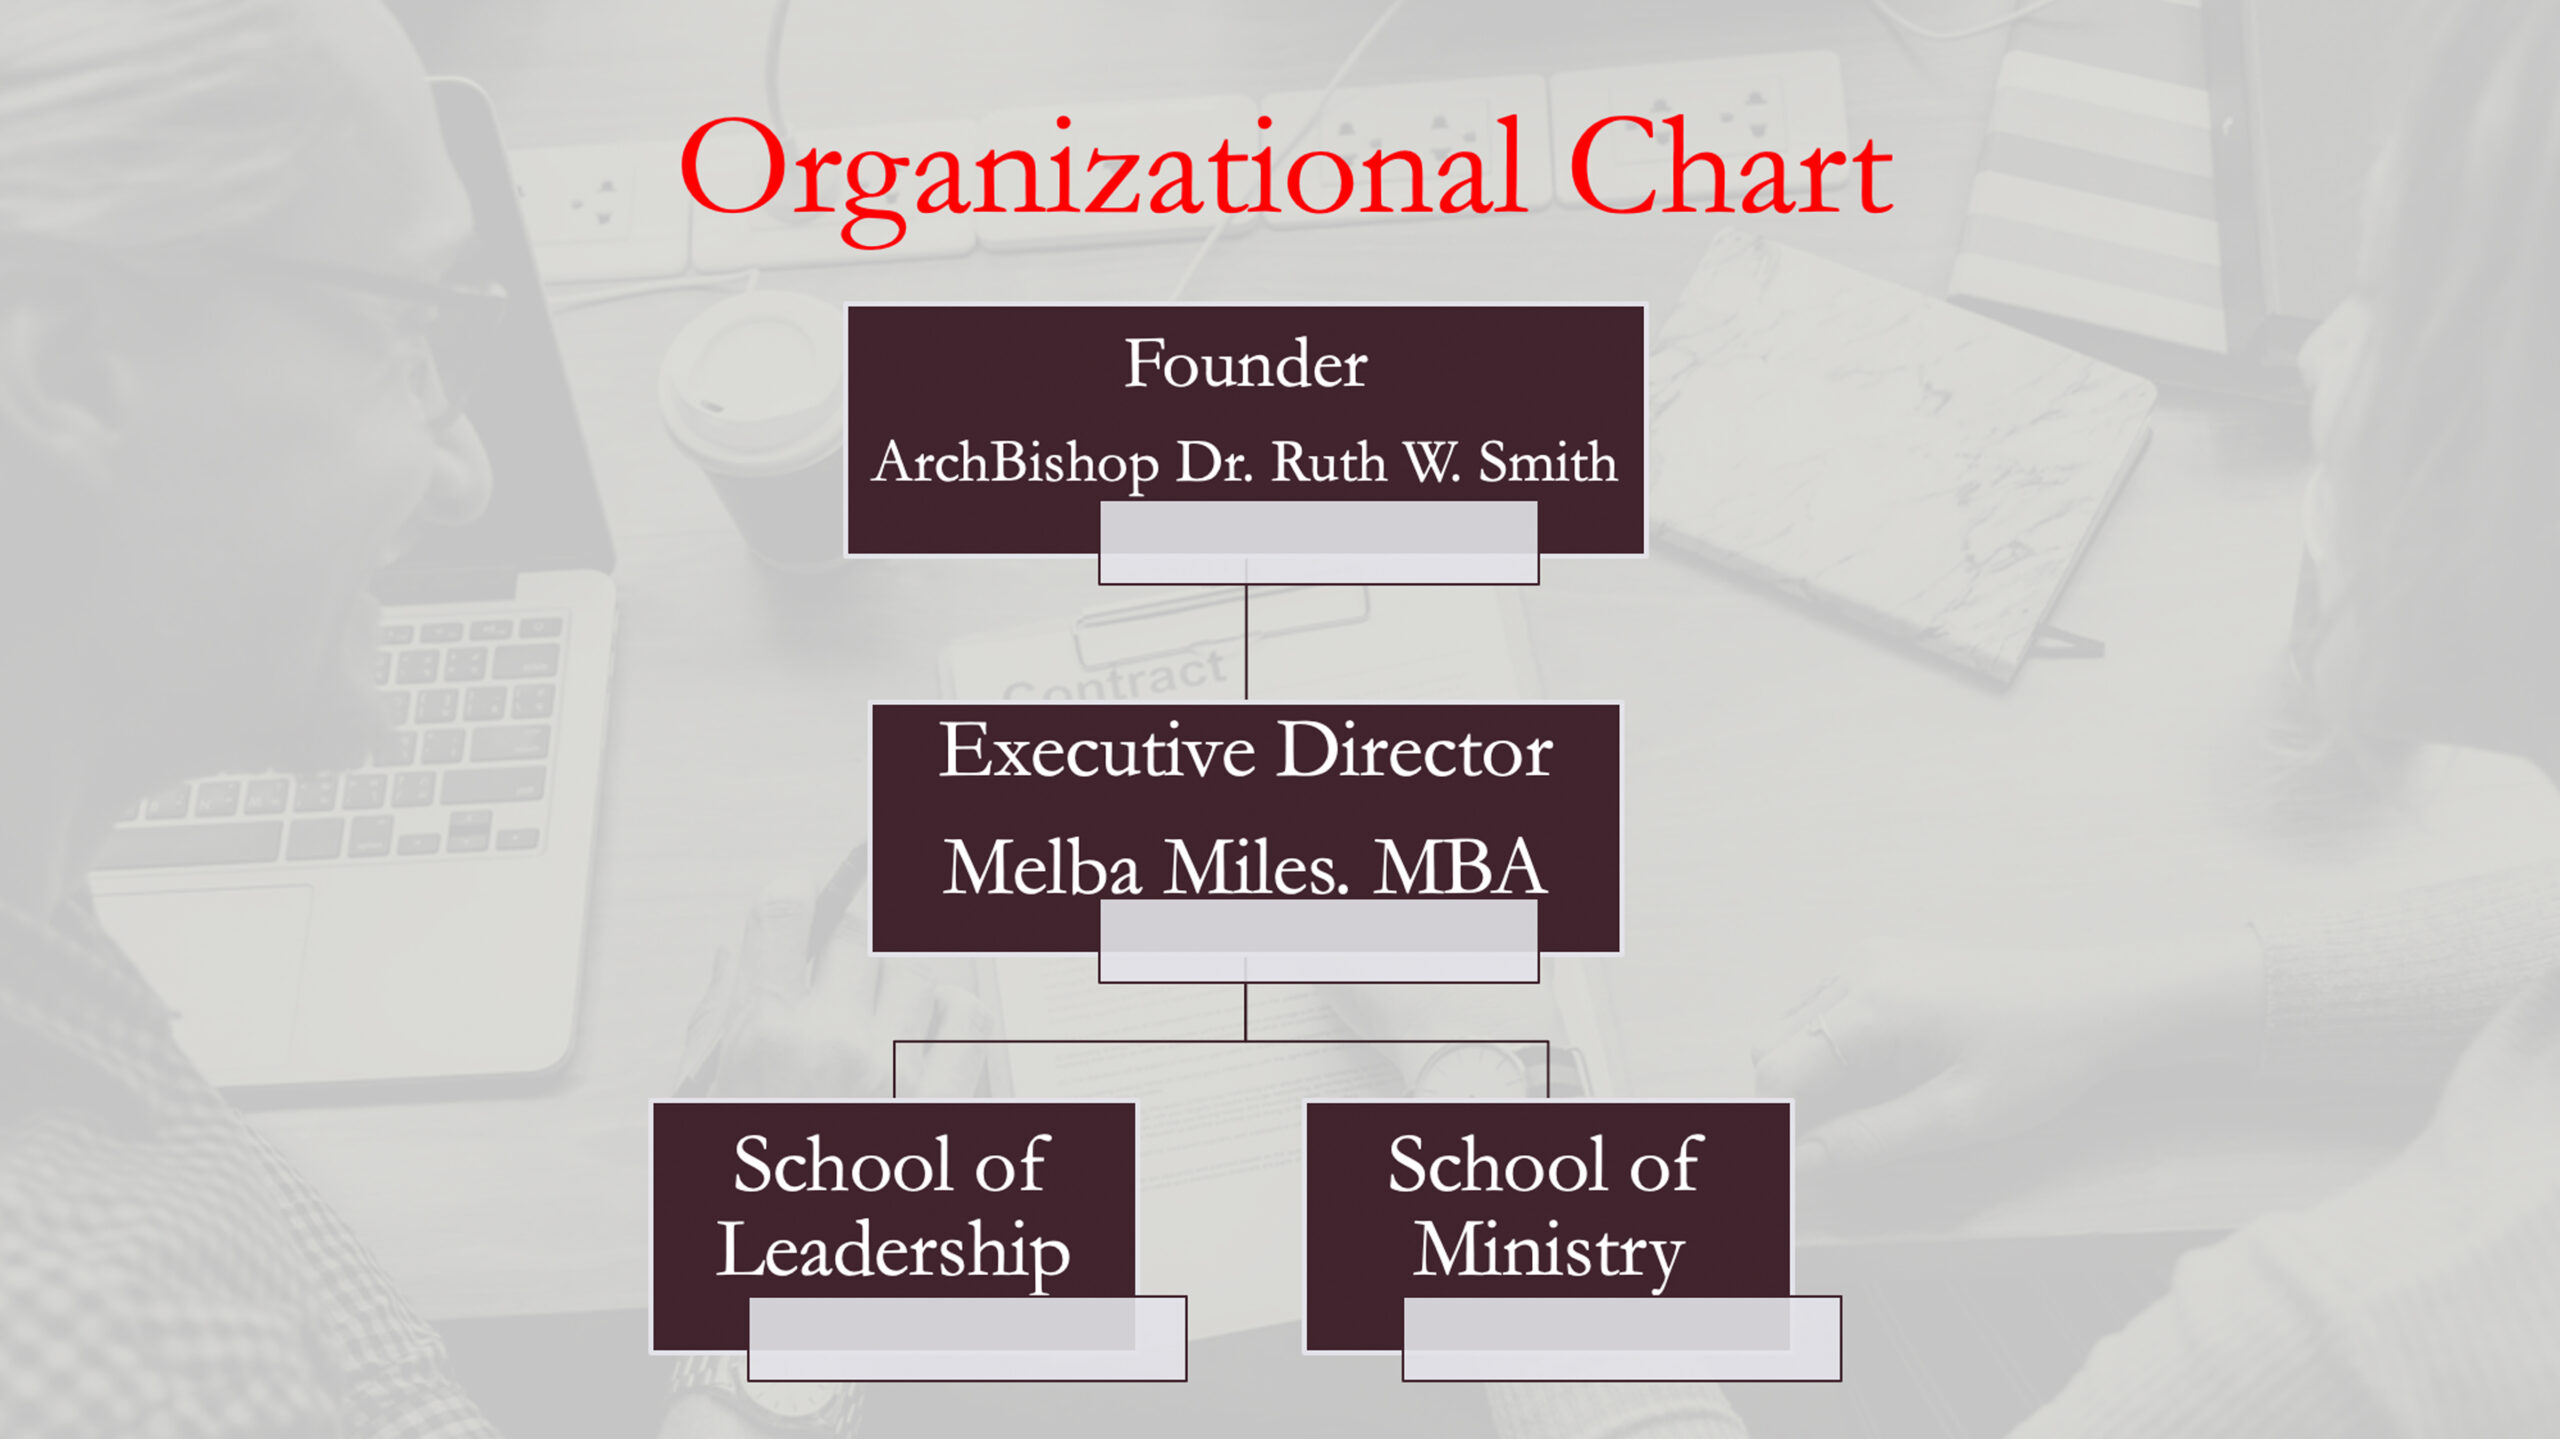 Org Chart Founder Archbishop dr. ruth w smith, executive director melba miles mba, school of leadership, school of ministry